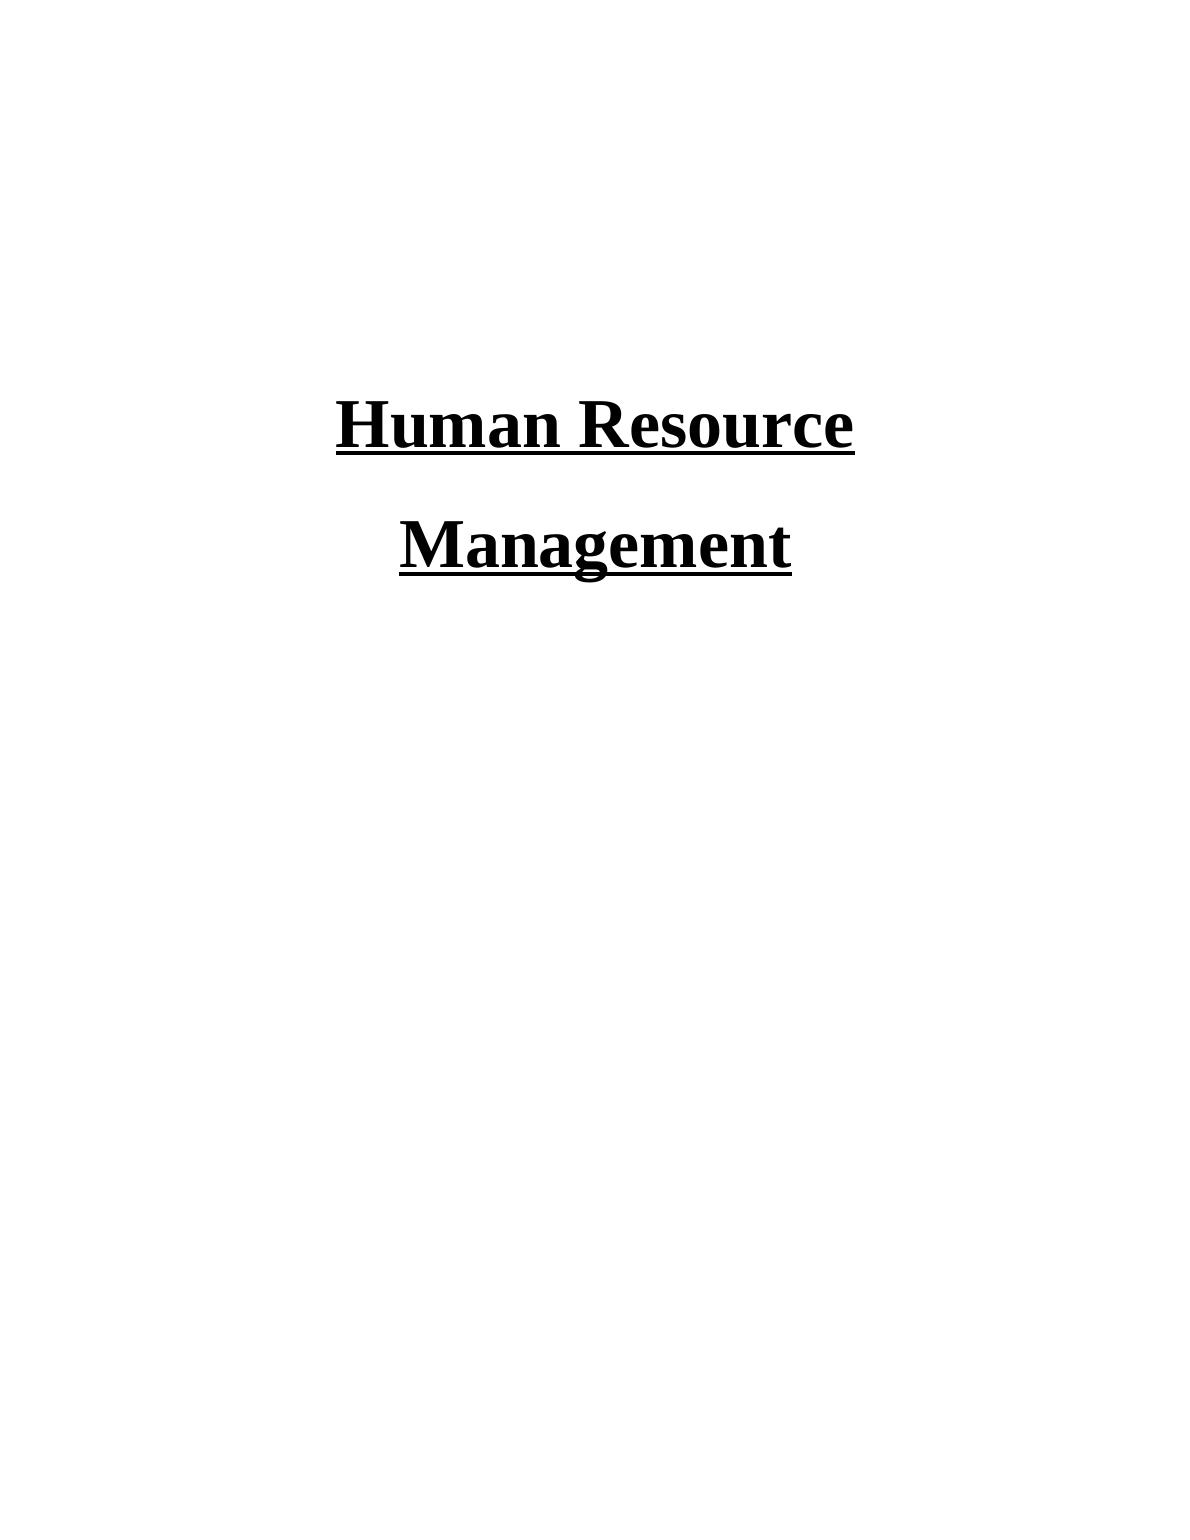 Human Resource Management - Strength and Weakness_1